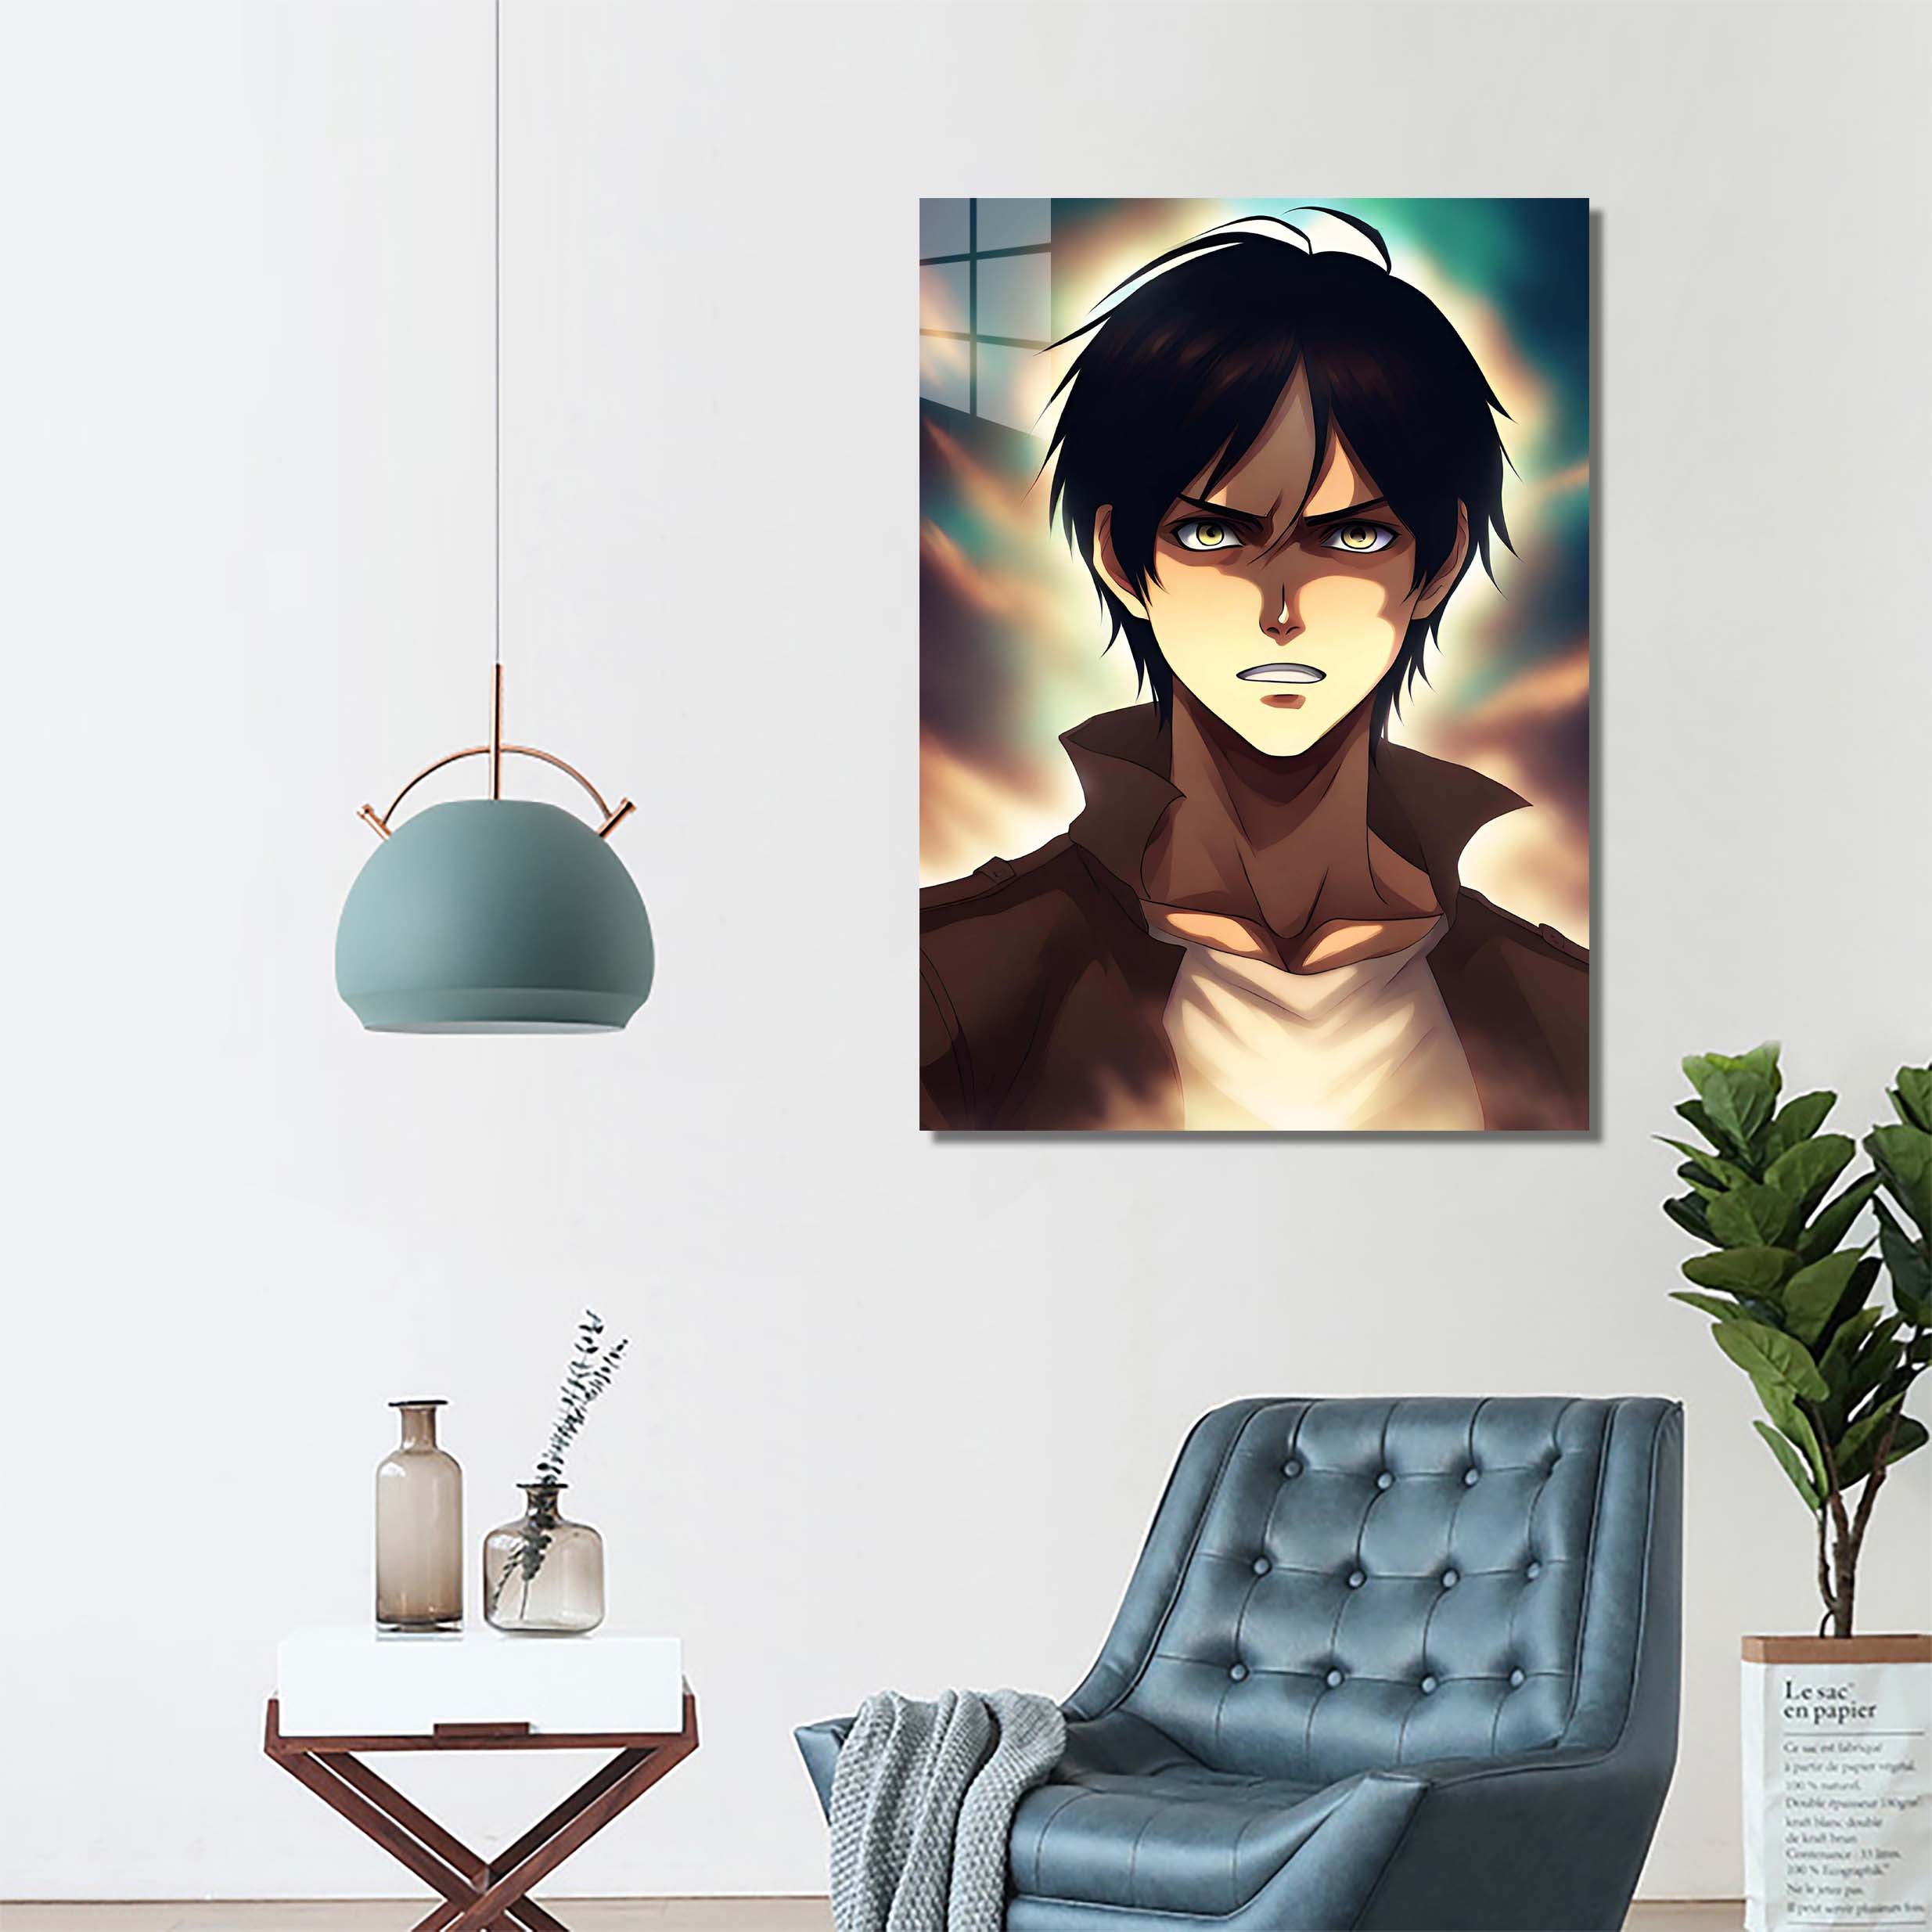 Eren Yeager art -designed by @DynCreative